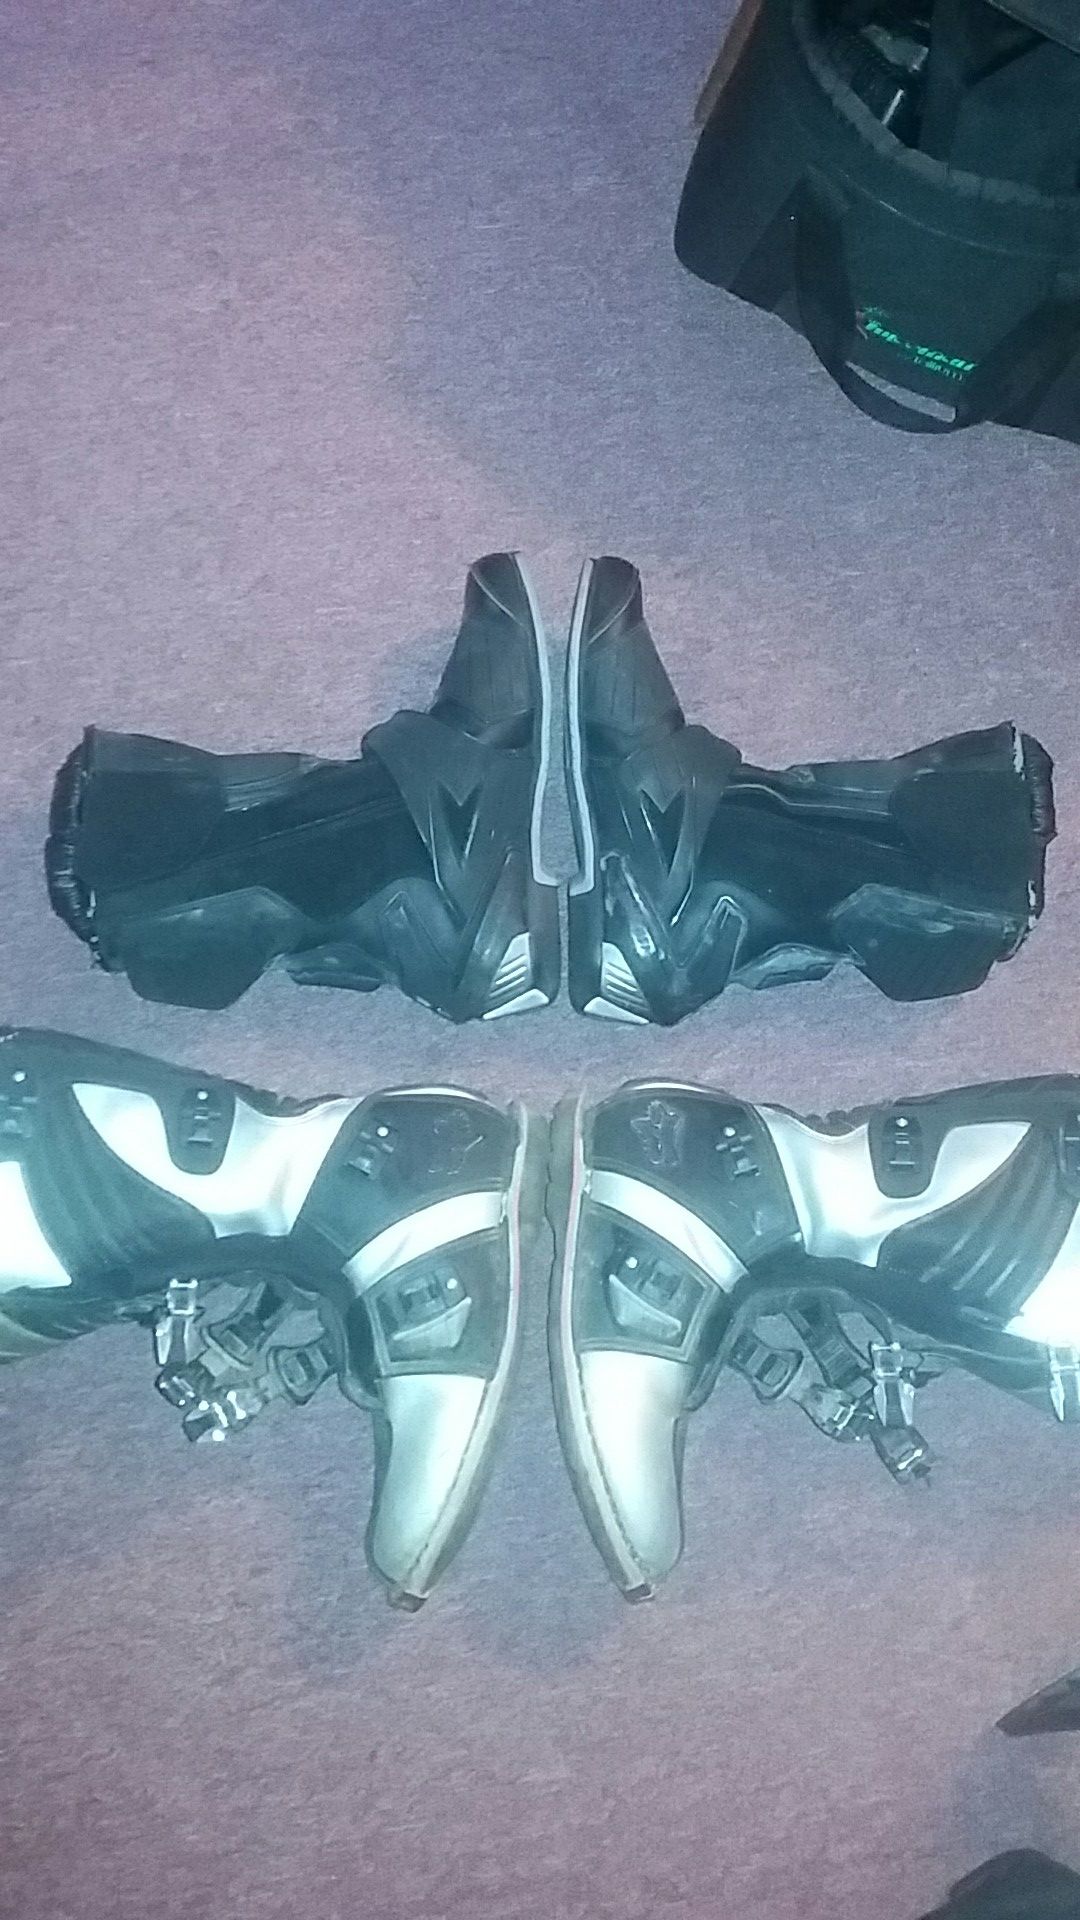 2 different brands of size 12 motocross boots one pair by Fox Racing the other are Joe rocket Brand boots